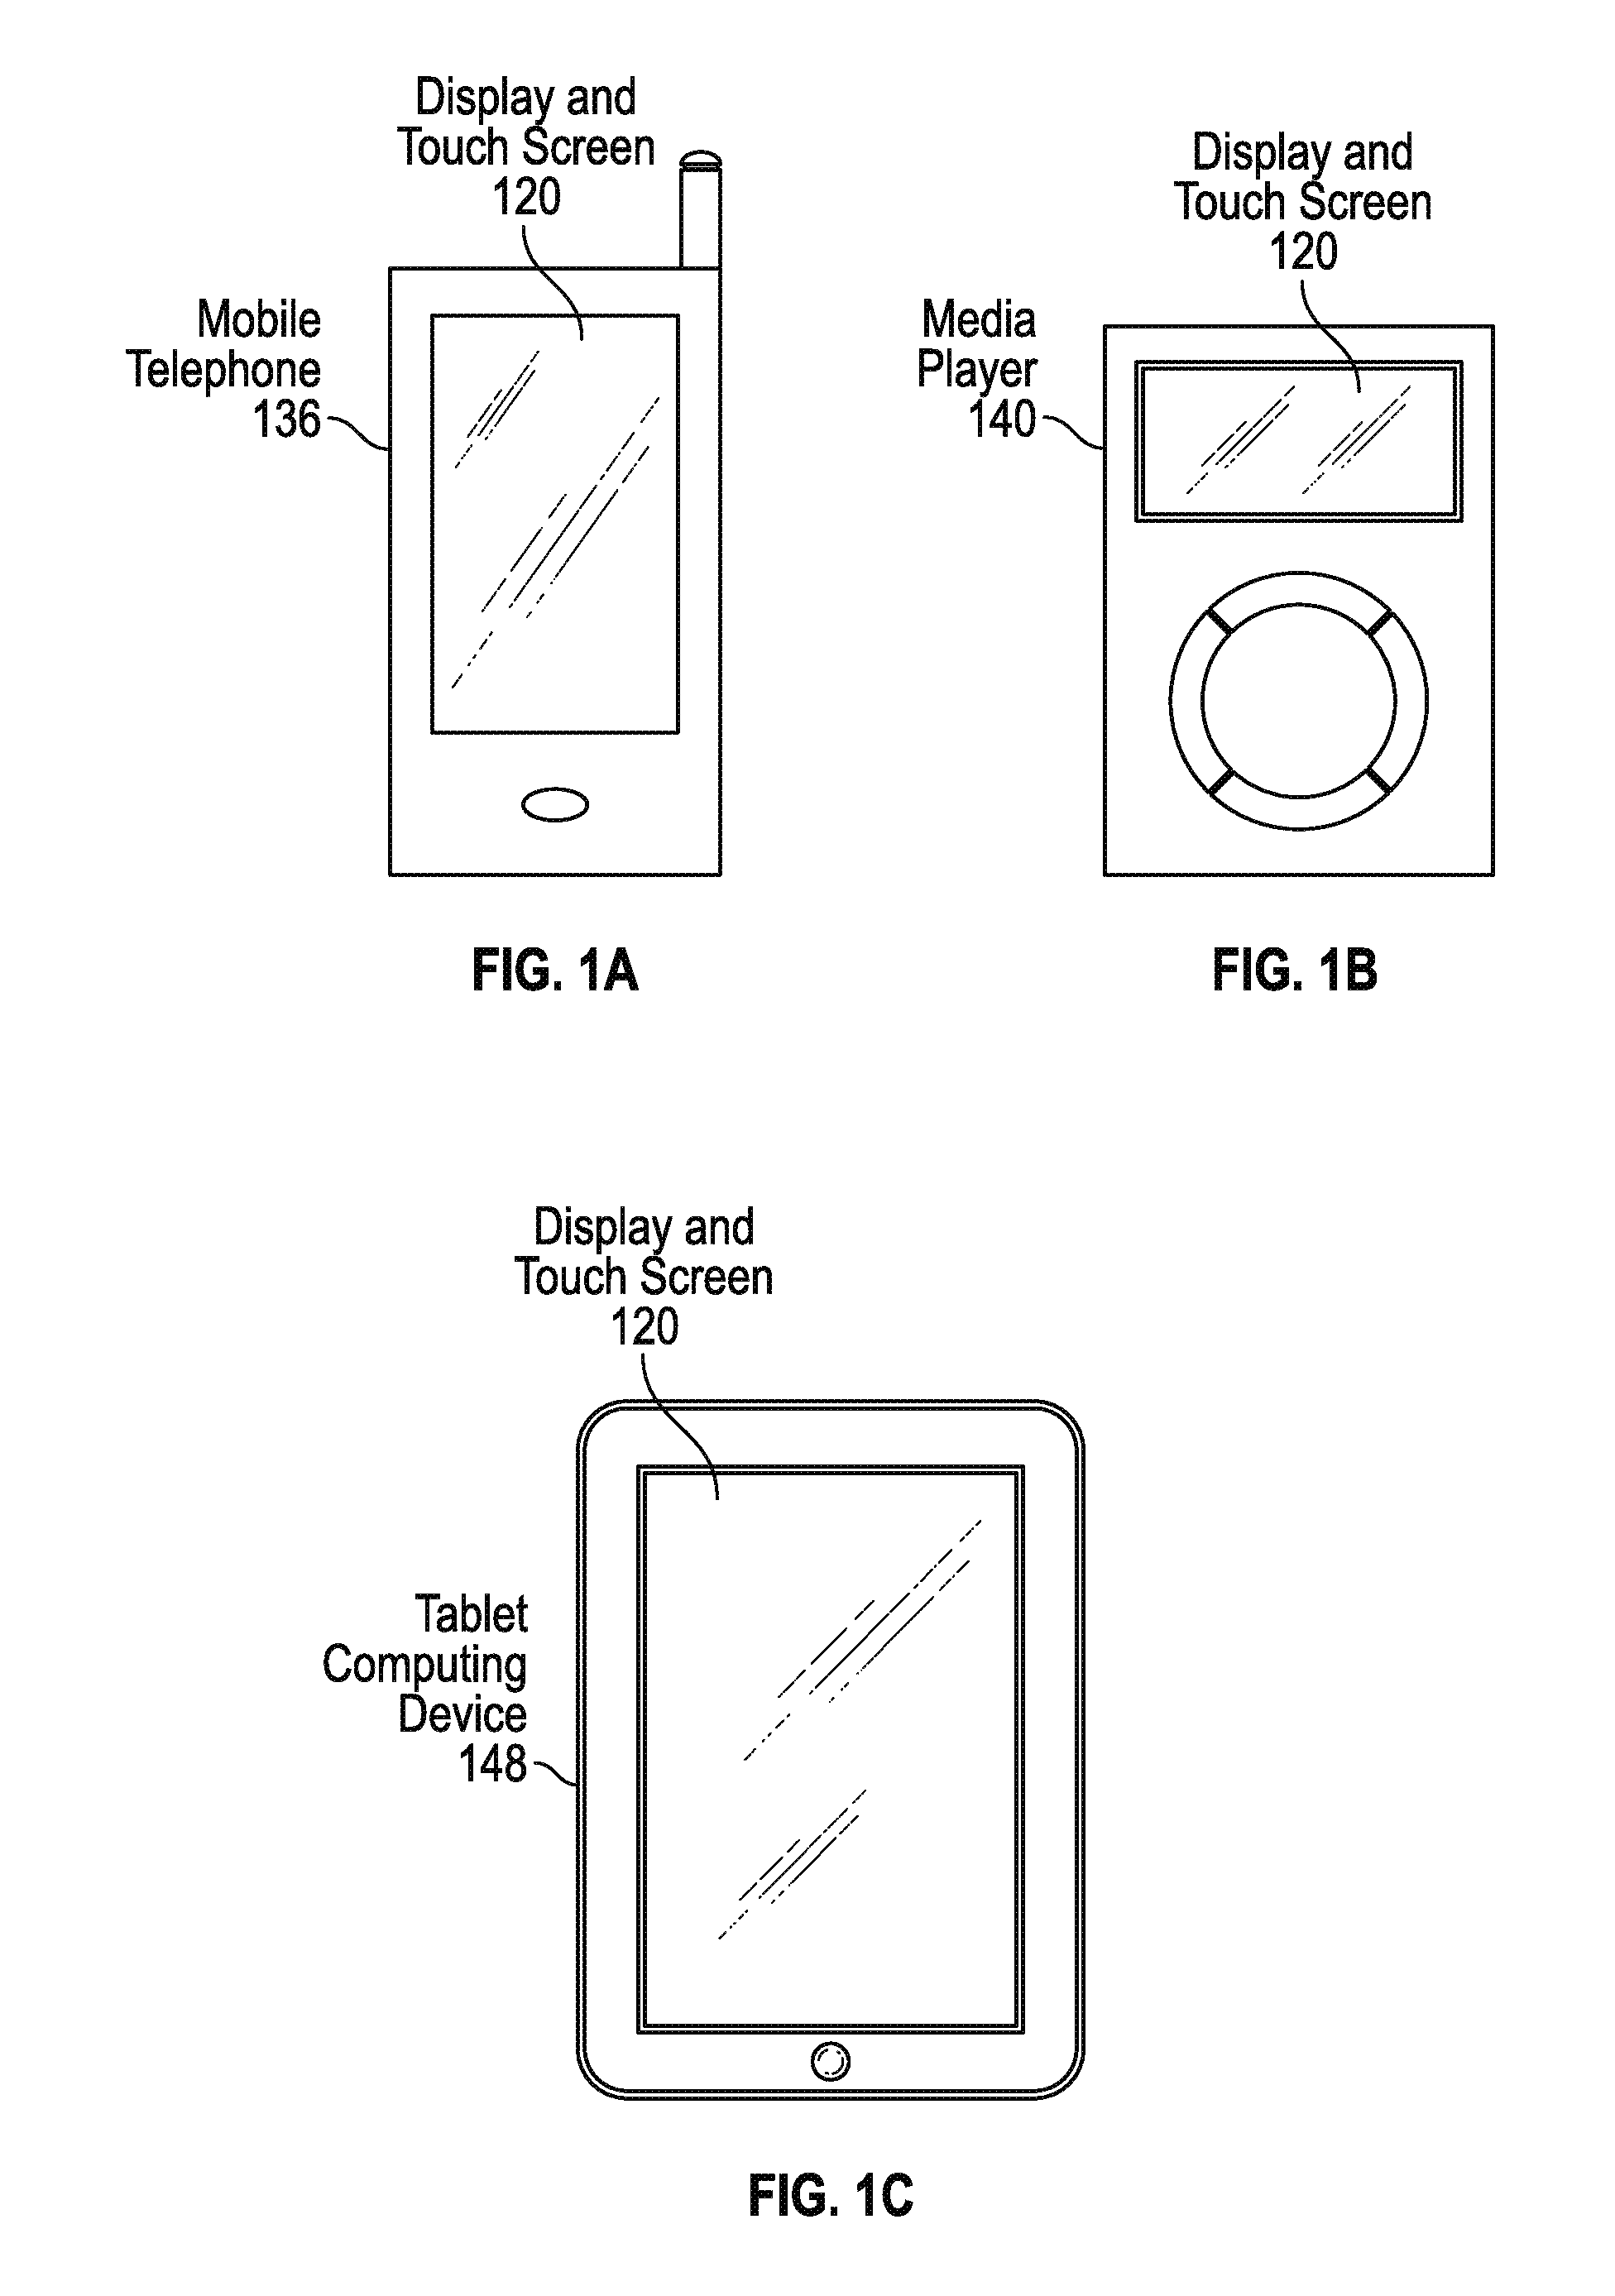 Integrated silicon-oled display and touch sensor panel